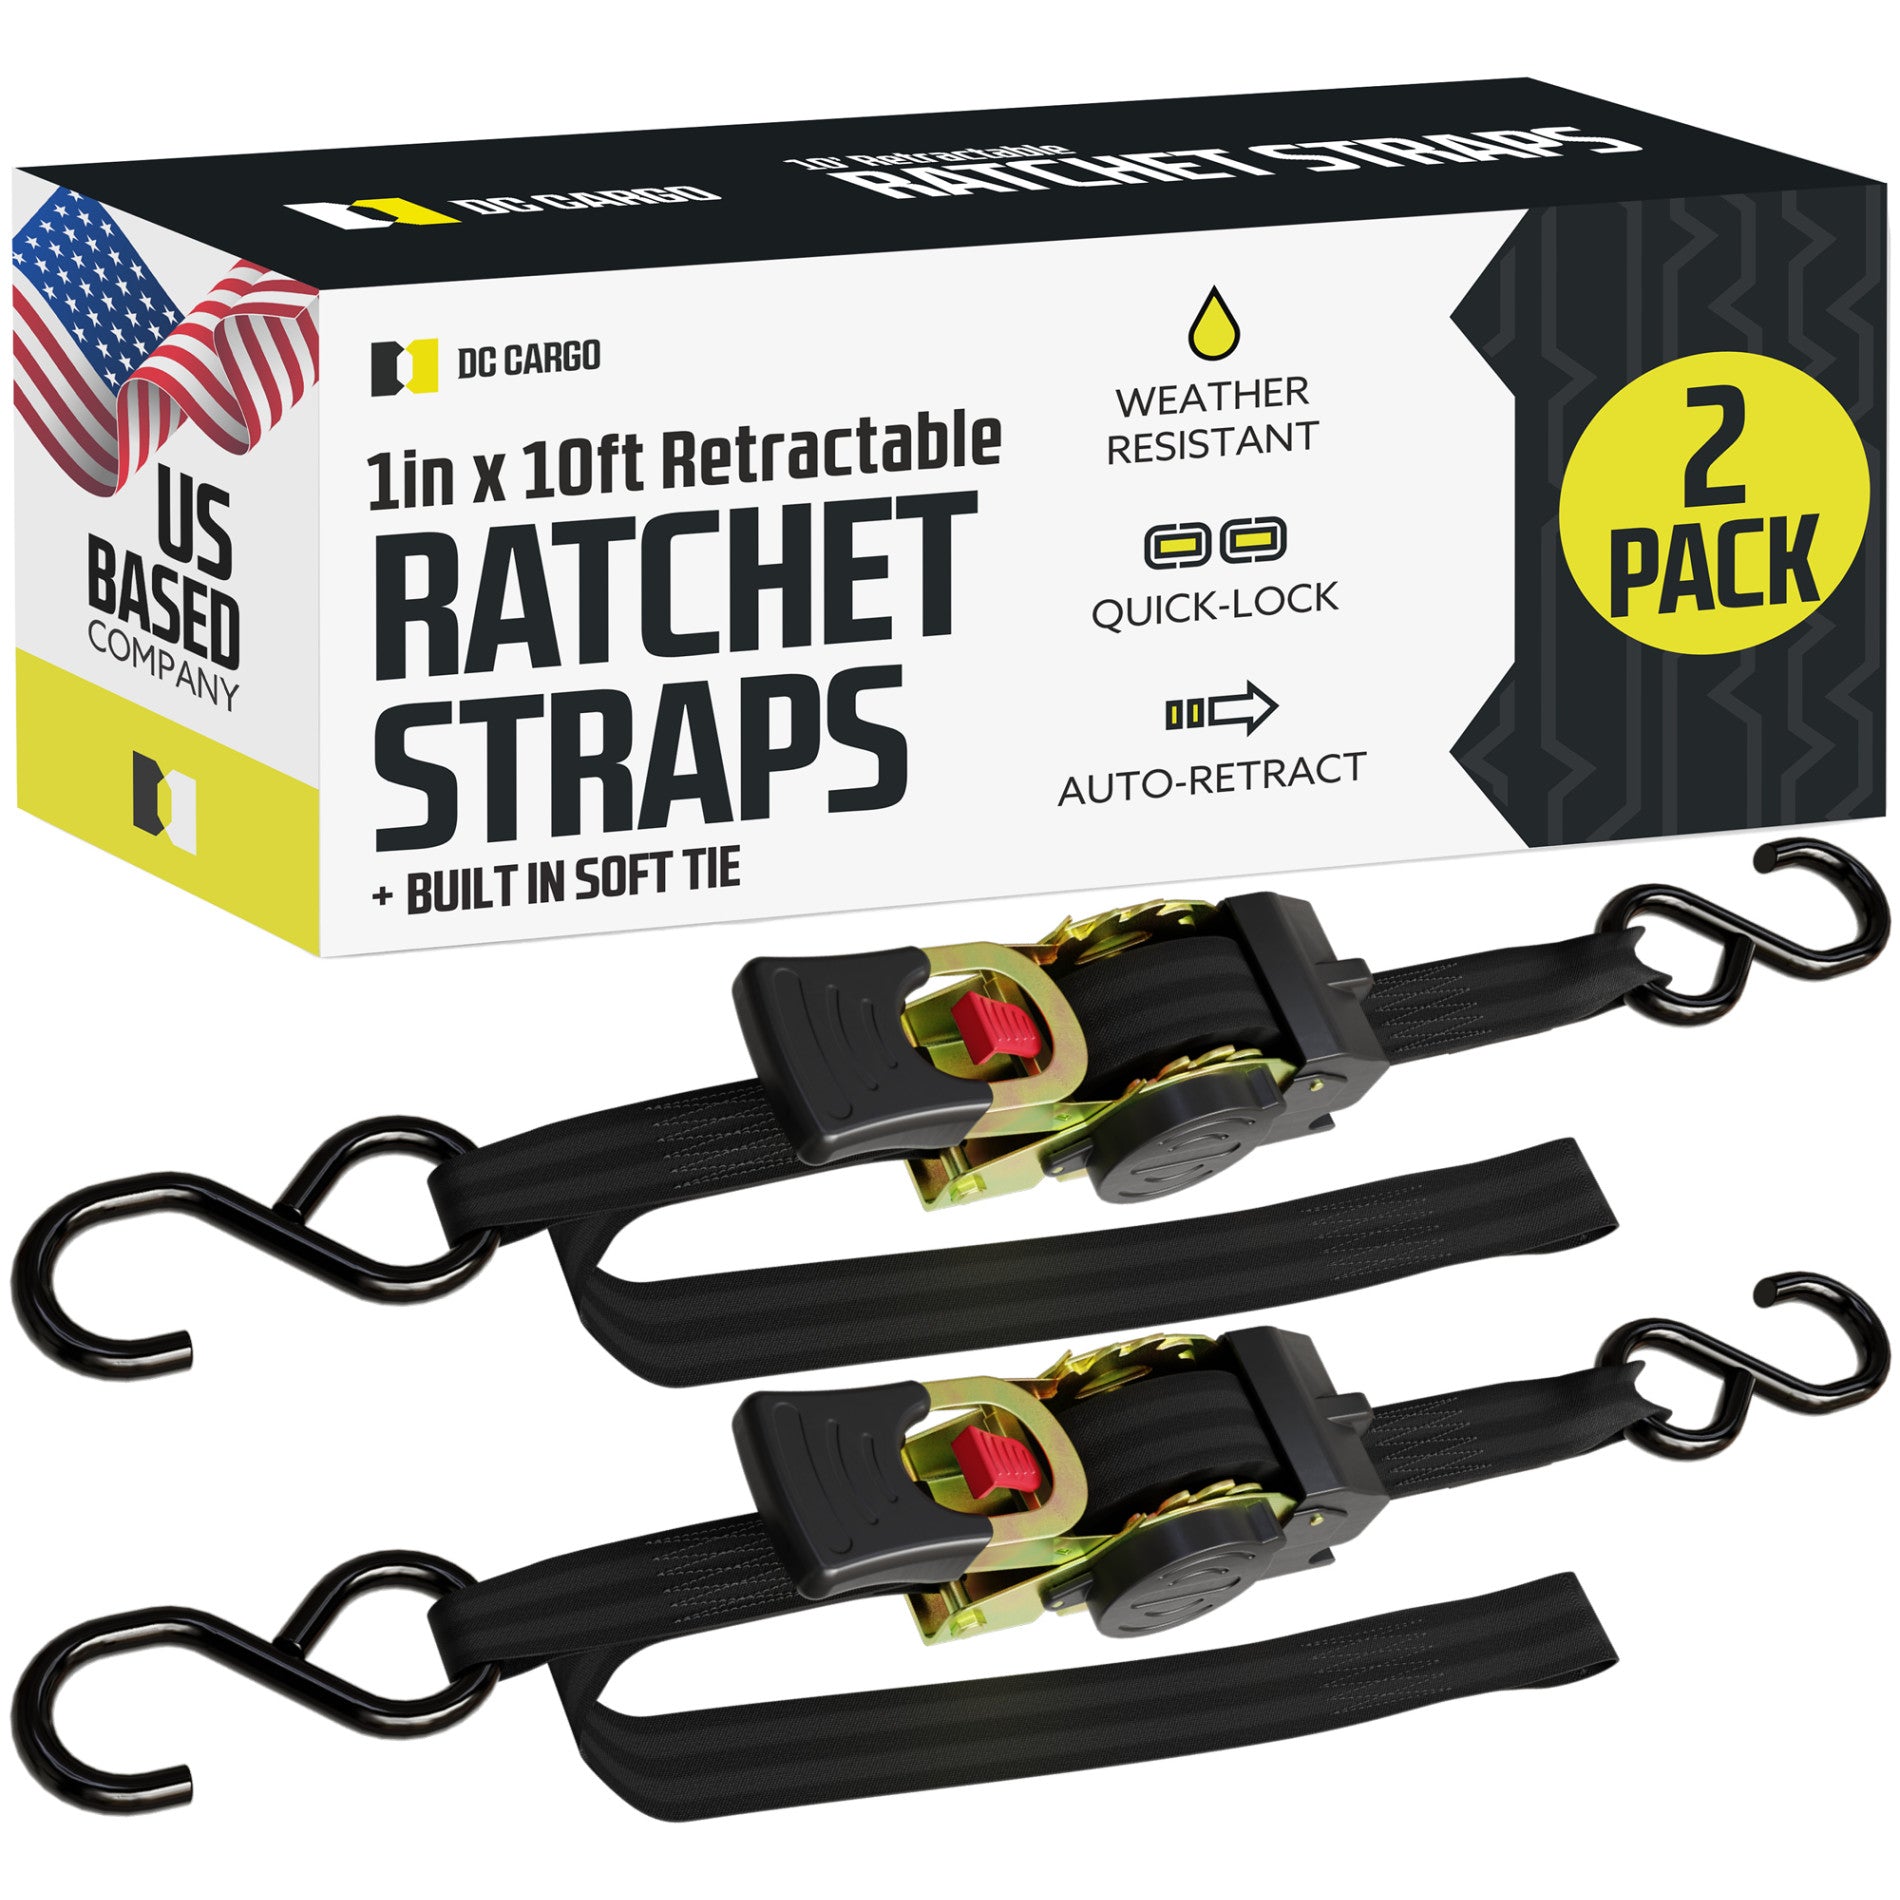 USA 2 x 8' Off-Road Ratchet Tie Down Strap Snap Hook Car Auto